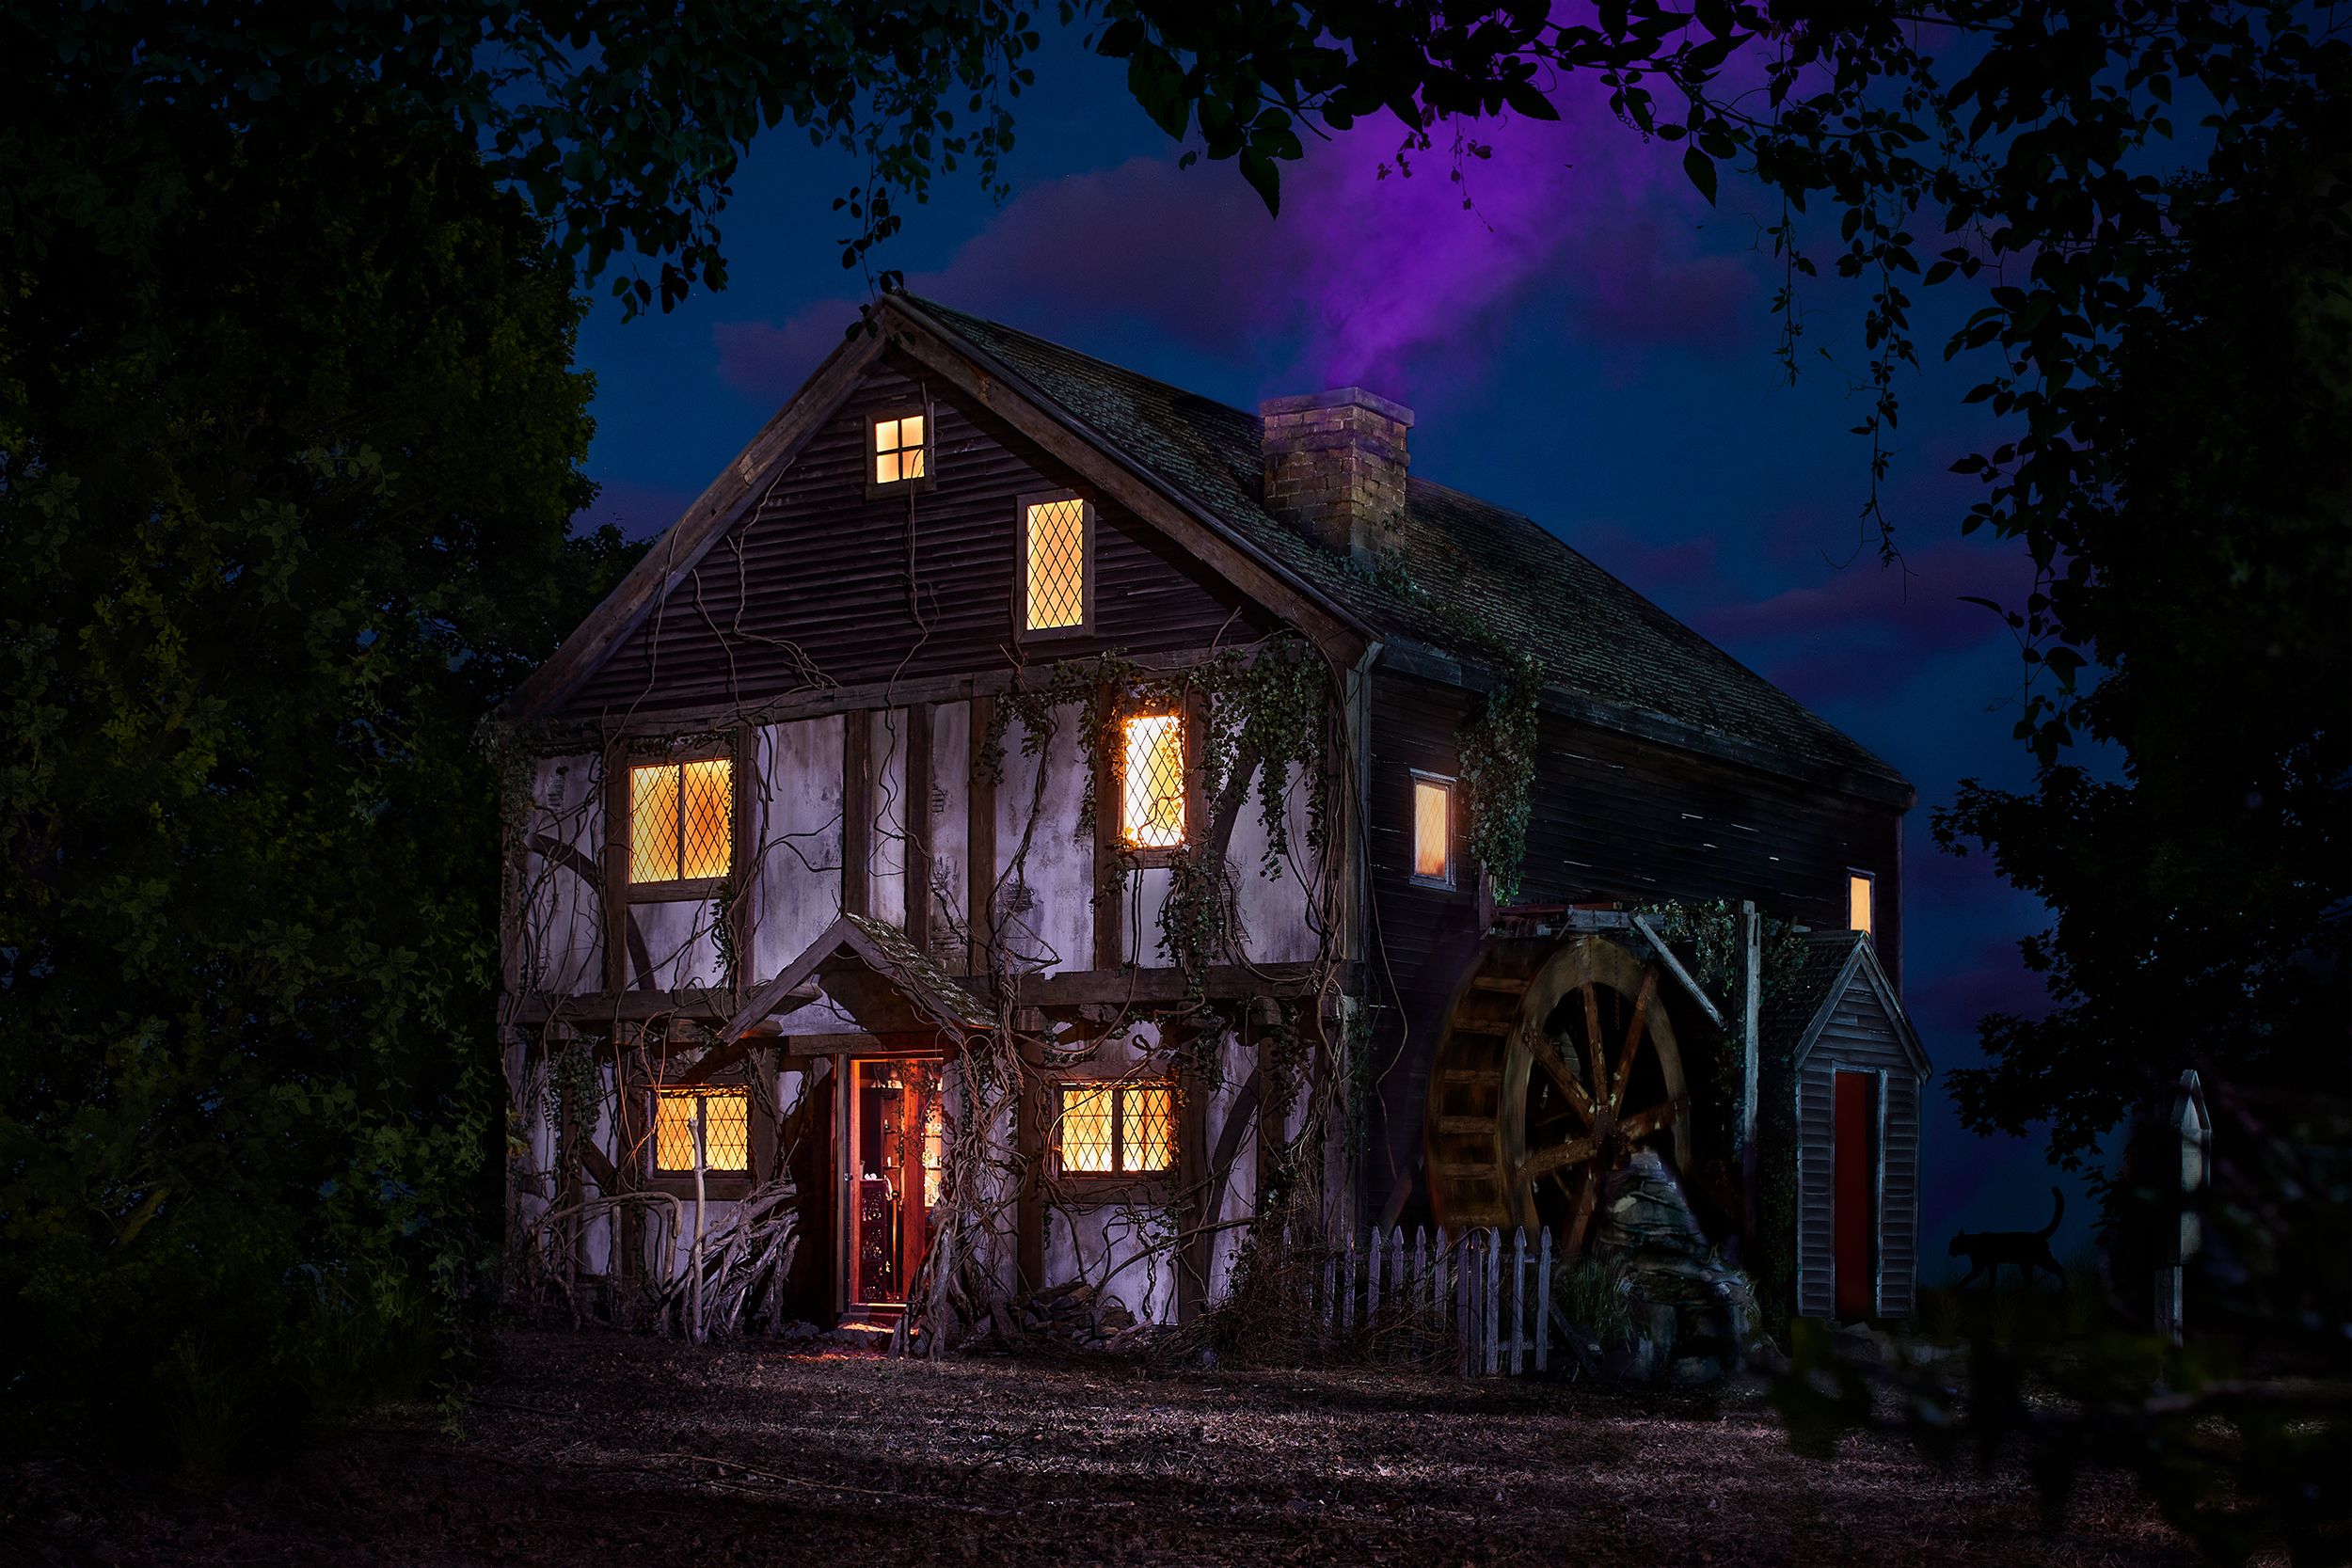 The scariest house on Airbnb is the 'Hocus Pocus' cottage